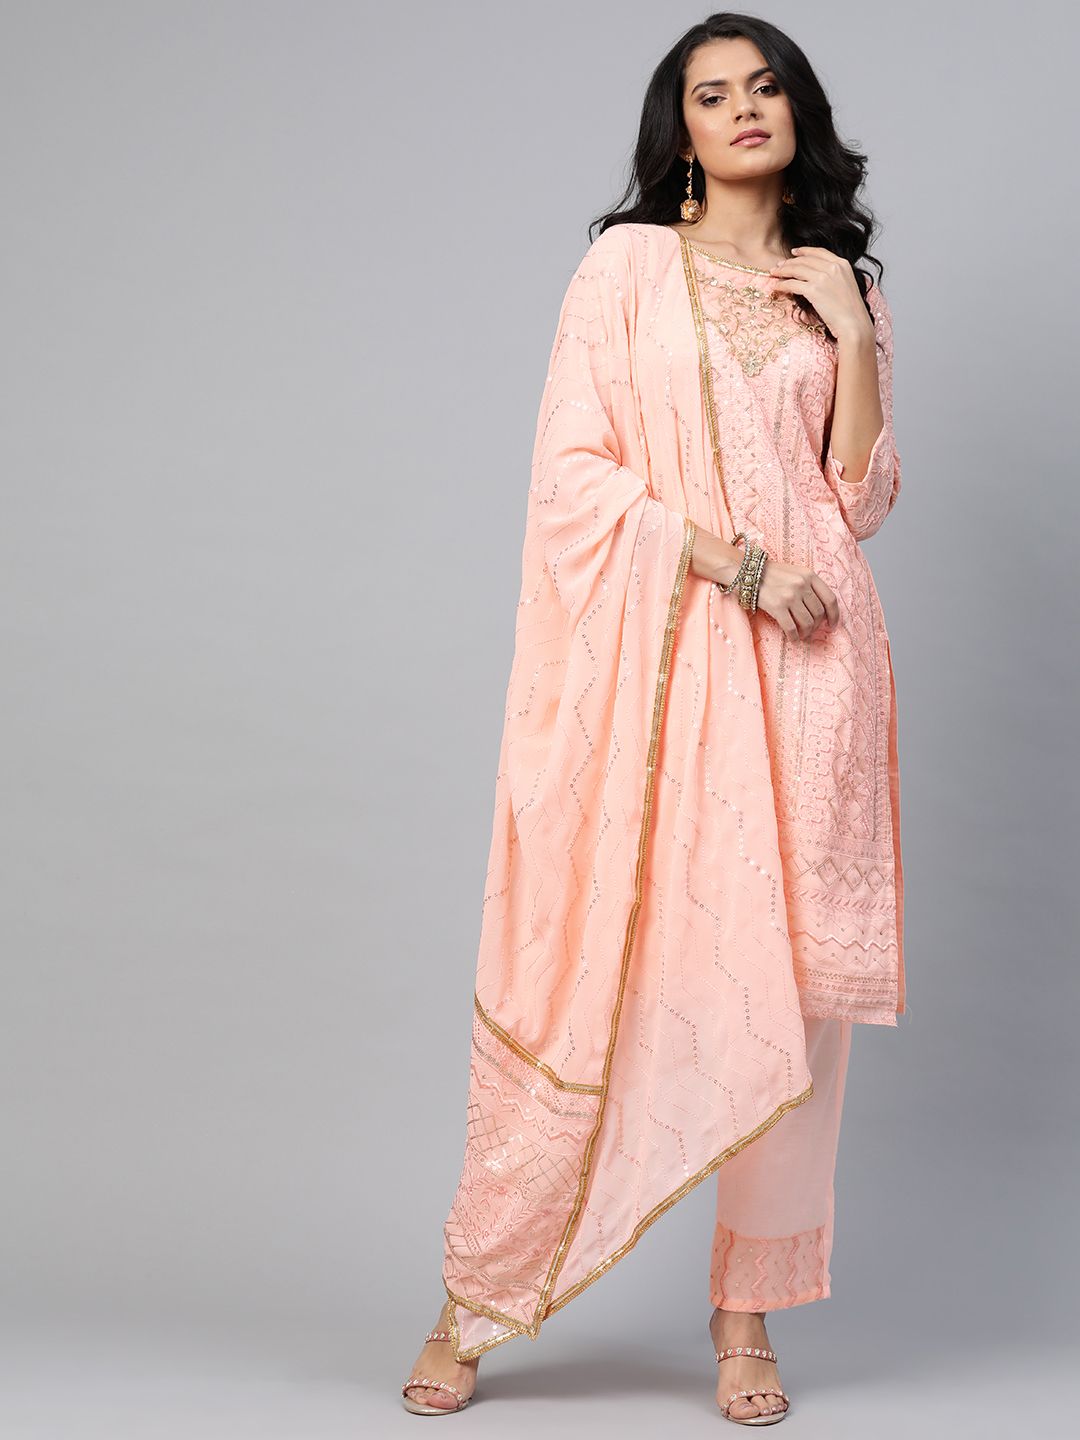 Readiprint Fashions Peach-Coloured & Golden Embroidered Semi-Stitched Dress Material Price in India